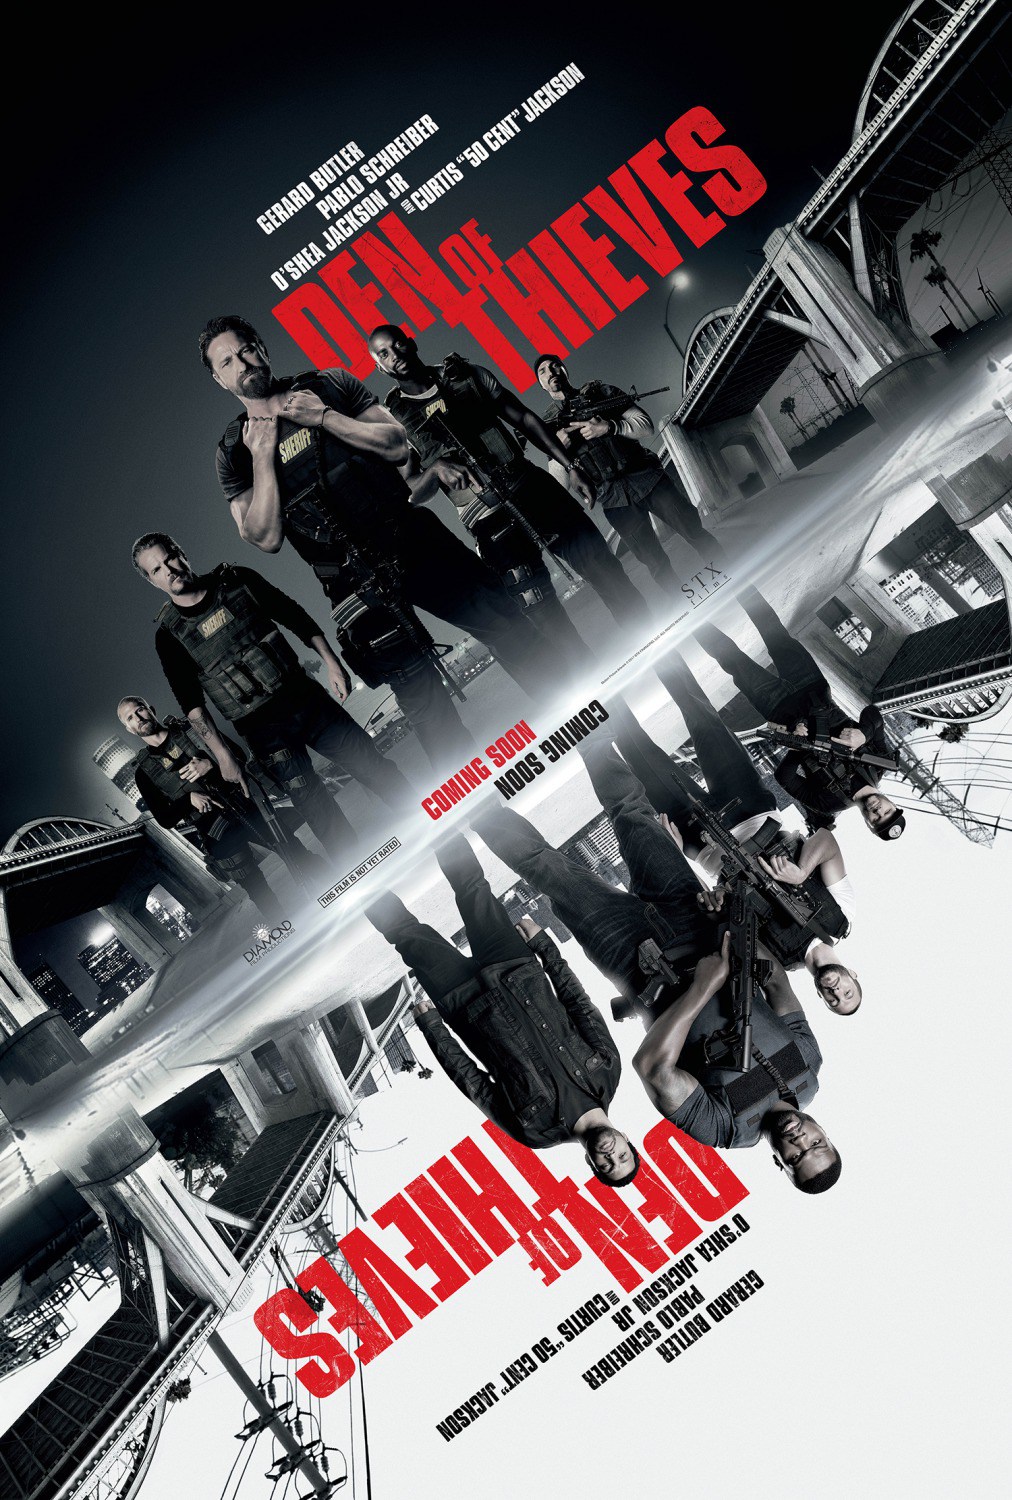 Den of Thieves Movie Review